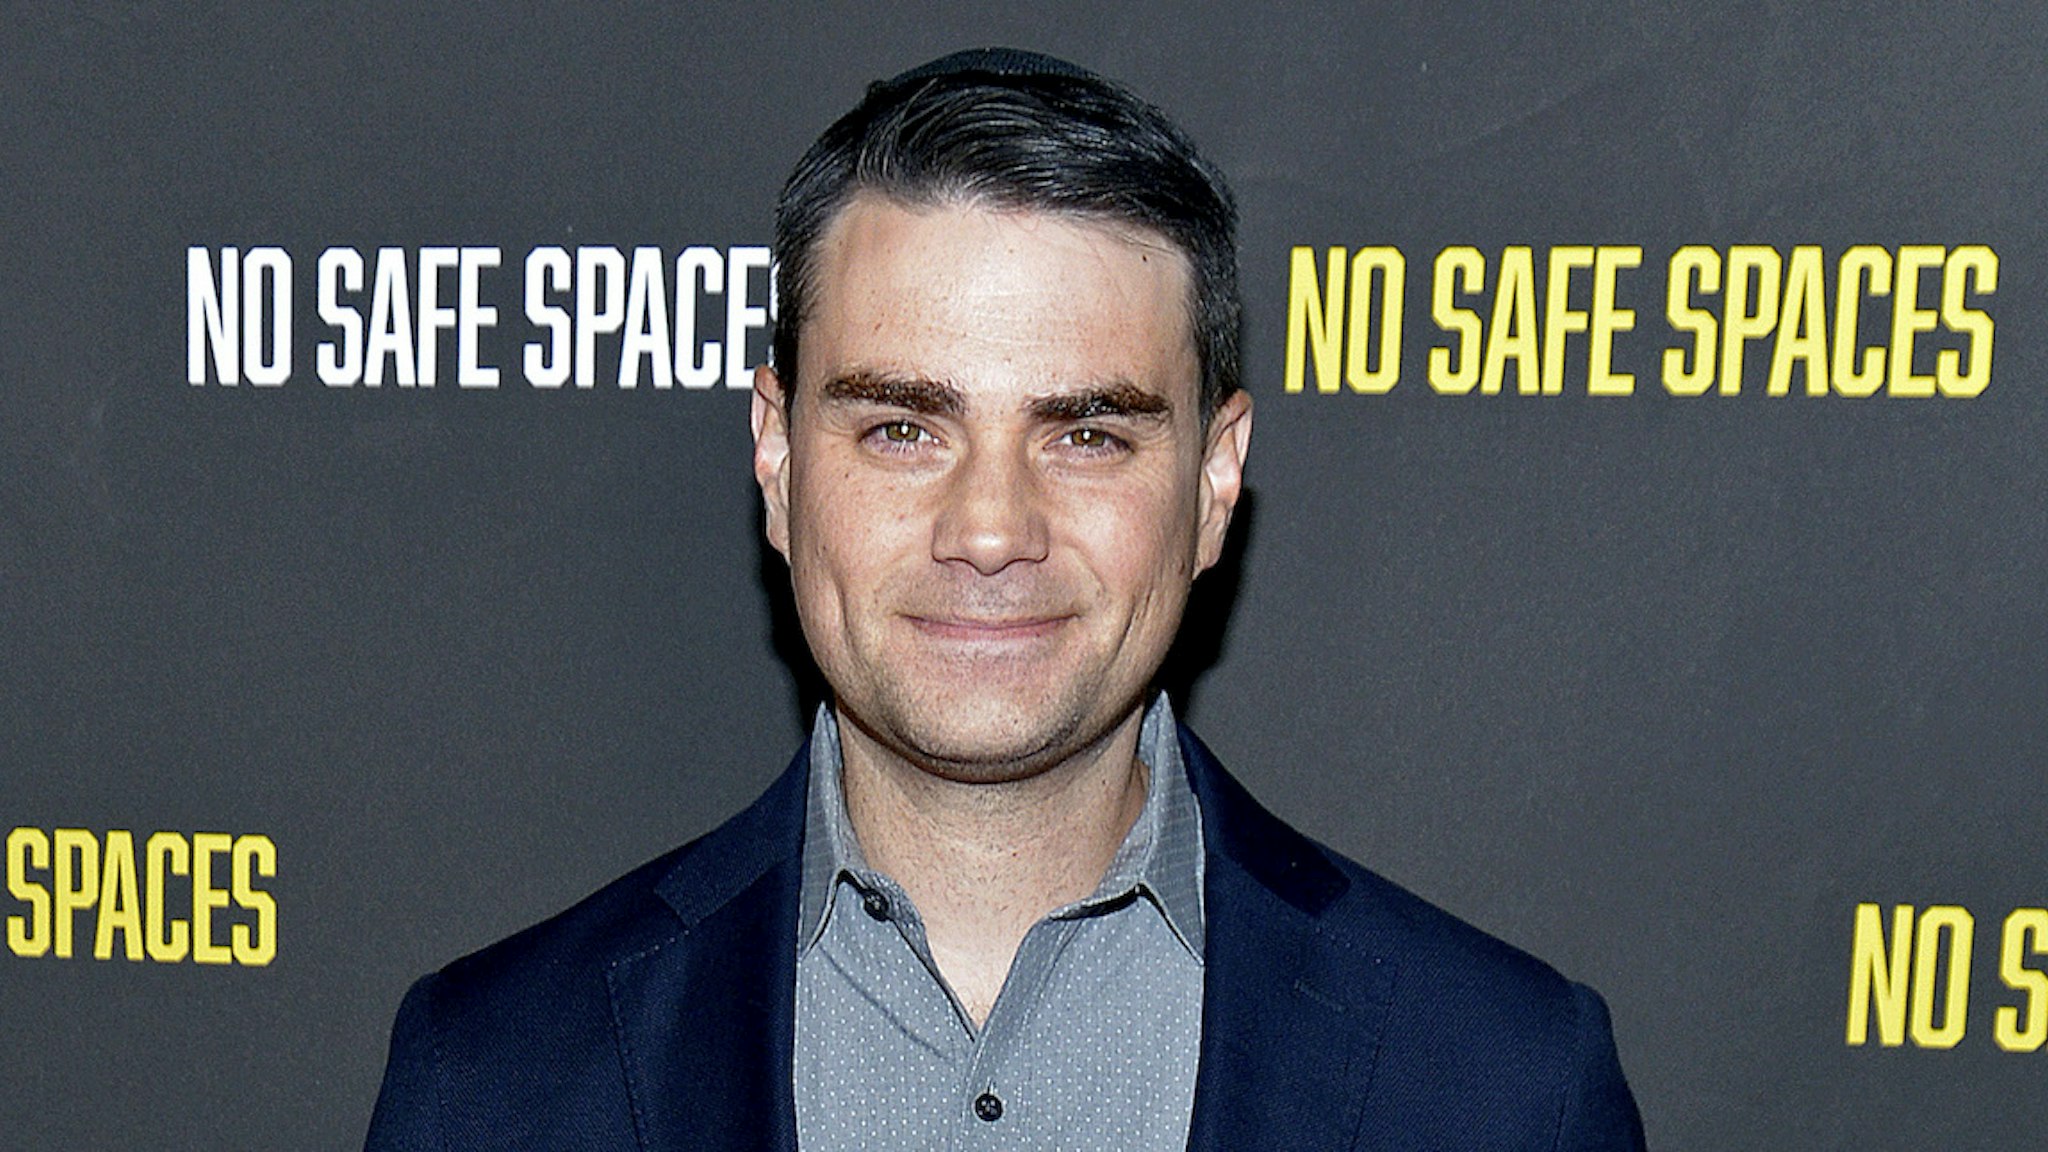 Ben Shapiro attends the premiere of the film "No Safe Spaces" at TCL Chinese Theatre on November 11, 2019 in Hollywood, California. (Photo by Michael Tullberg/Getty Images)